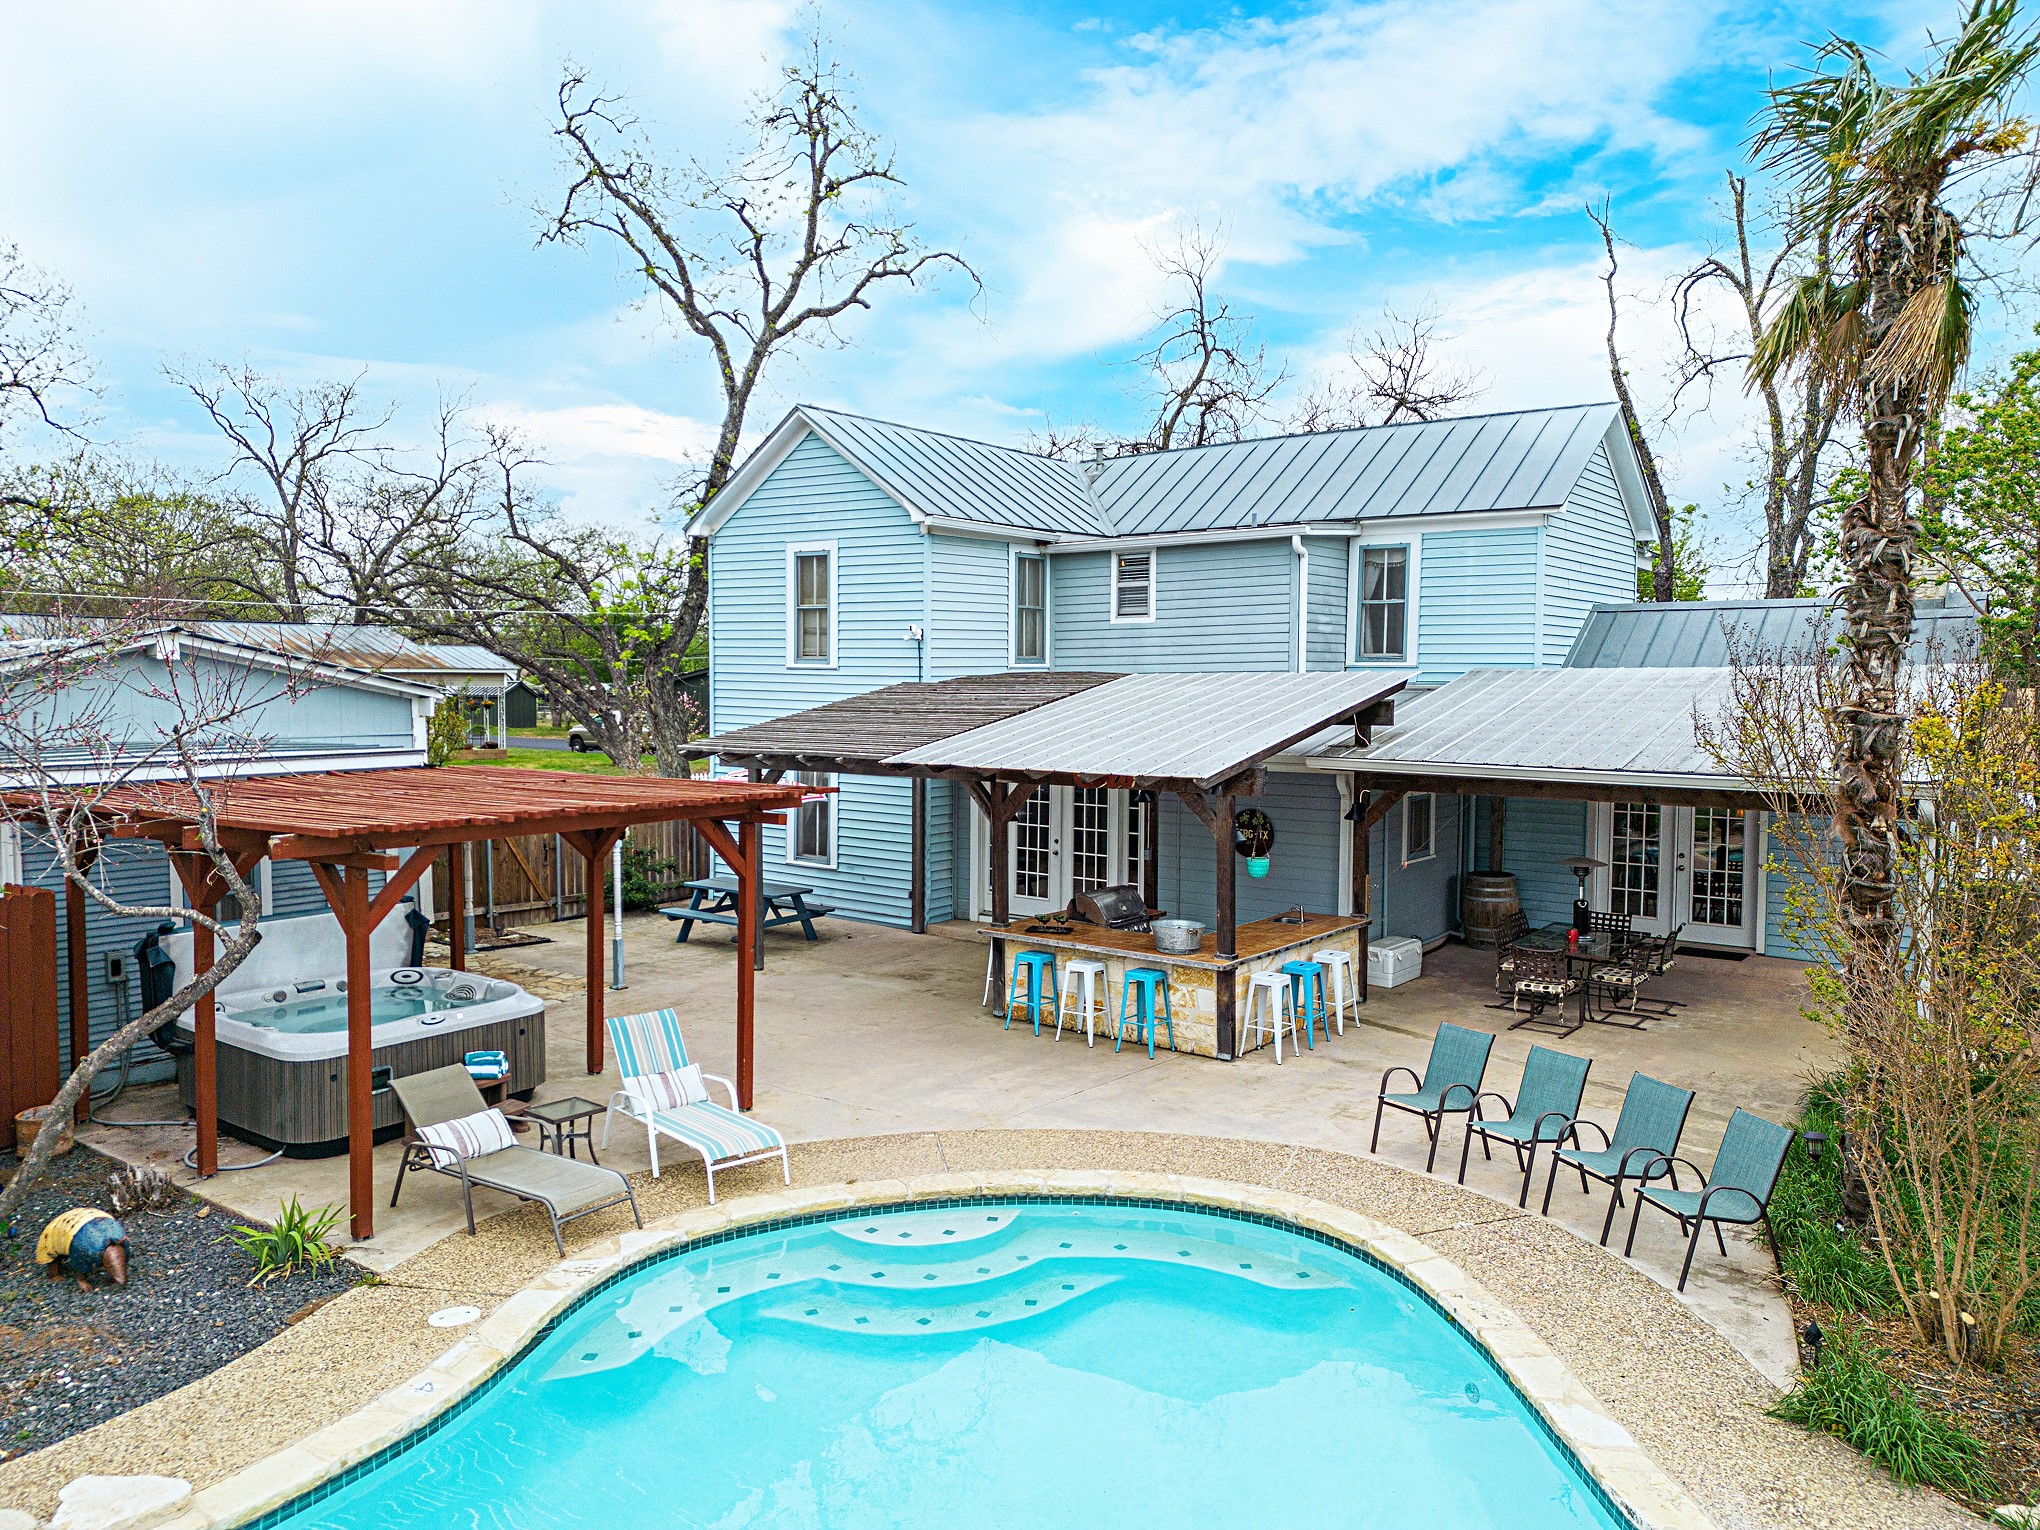 Perfect for entertaining, this backyard oasis features a pool, hot tub, and outdoor dining area with BBQ grill.